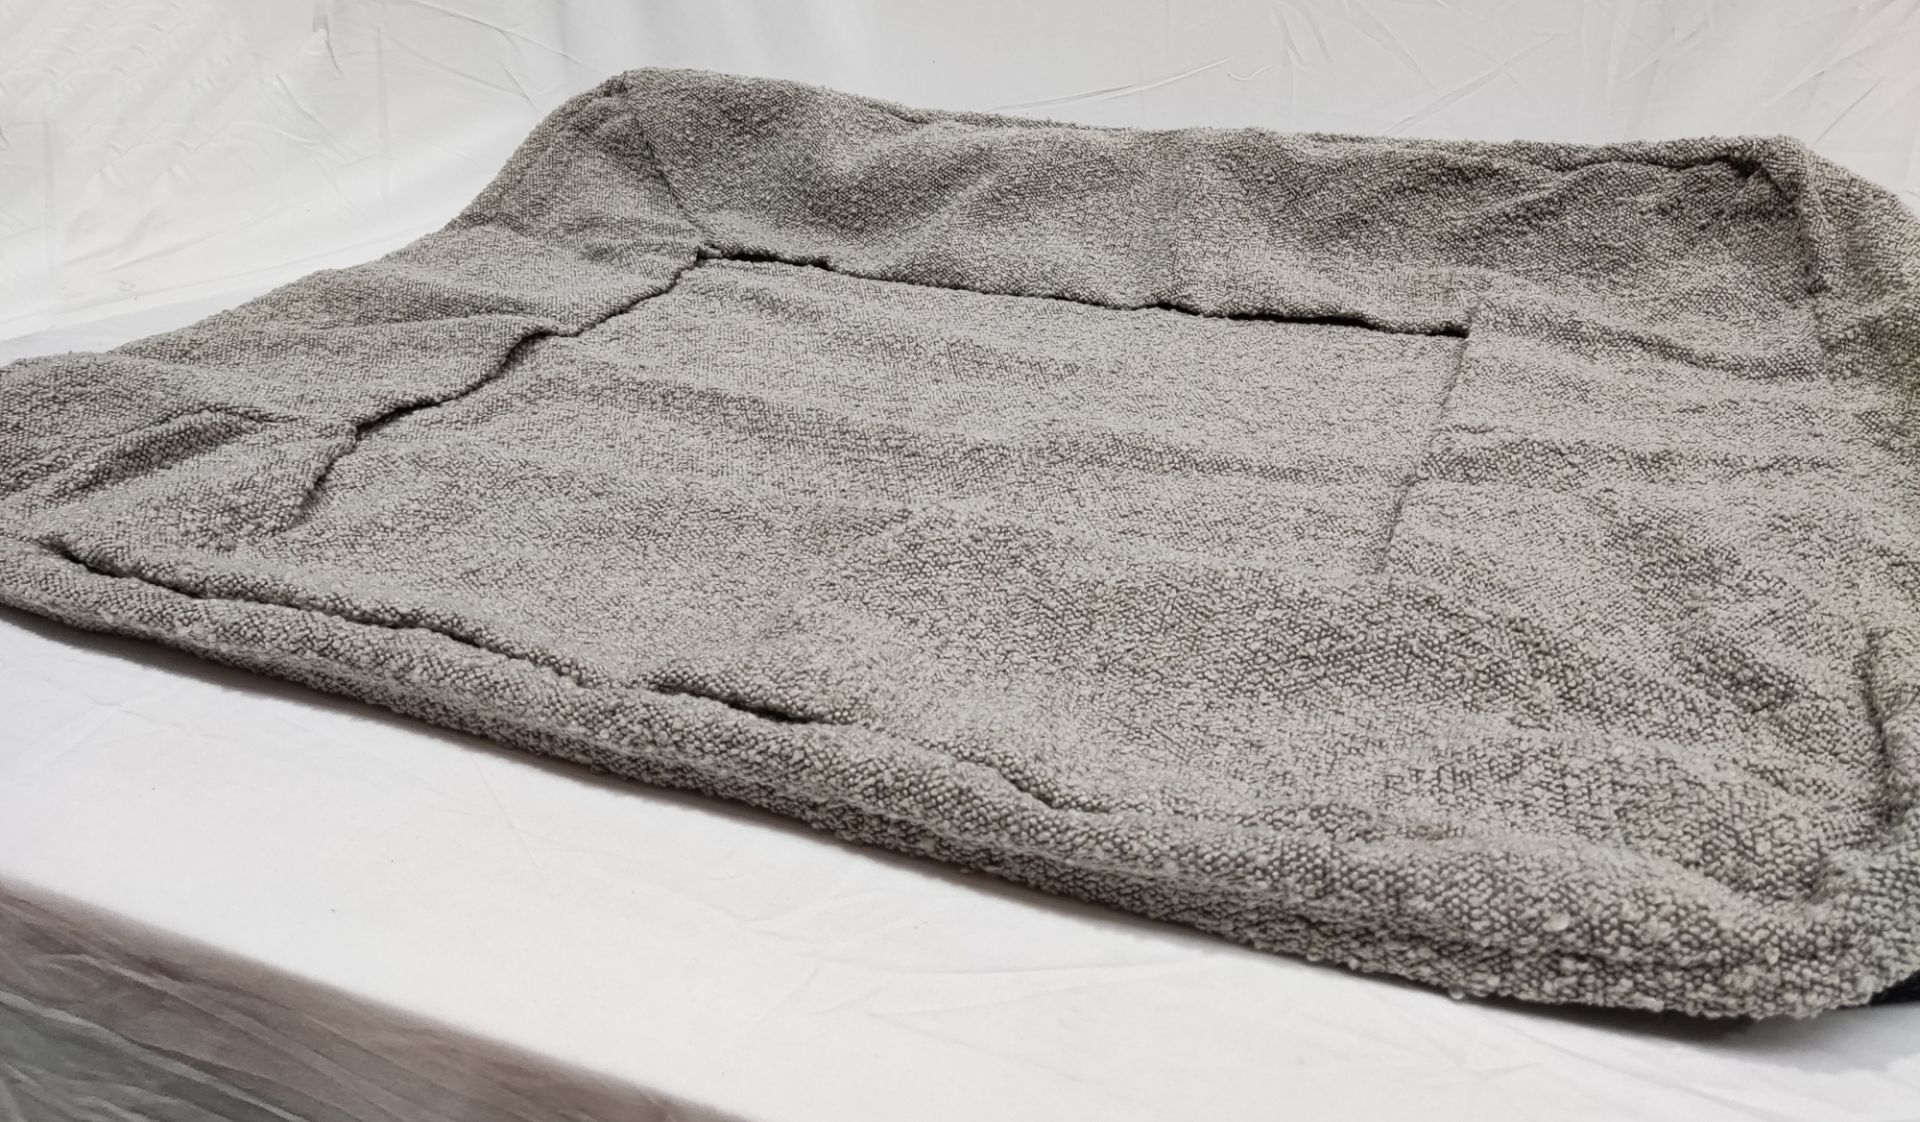 1 x TEDDY LONDON Grey Boucle Dog Bed Cover In Medium - Original RRP £79 - Ref: 7279336/HJL488/C28/ - Image 5 of 10